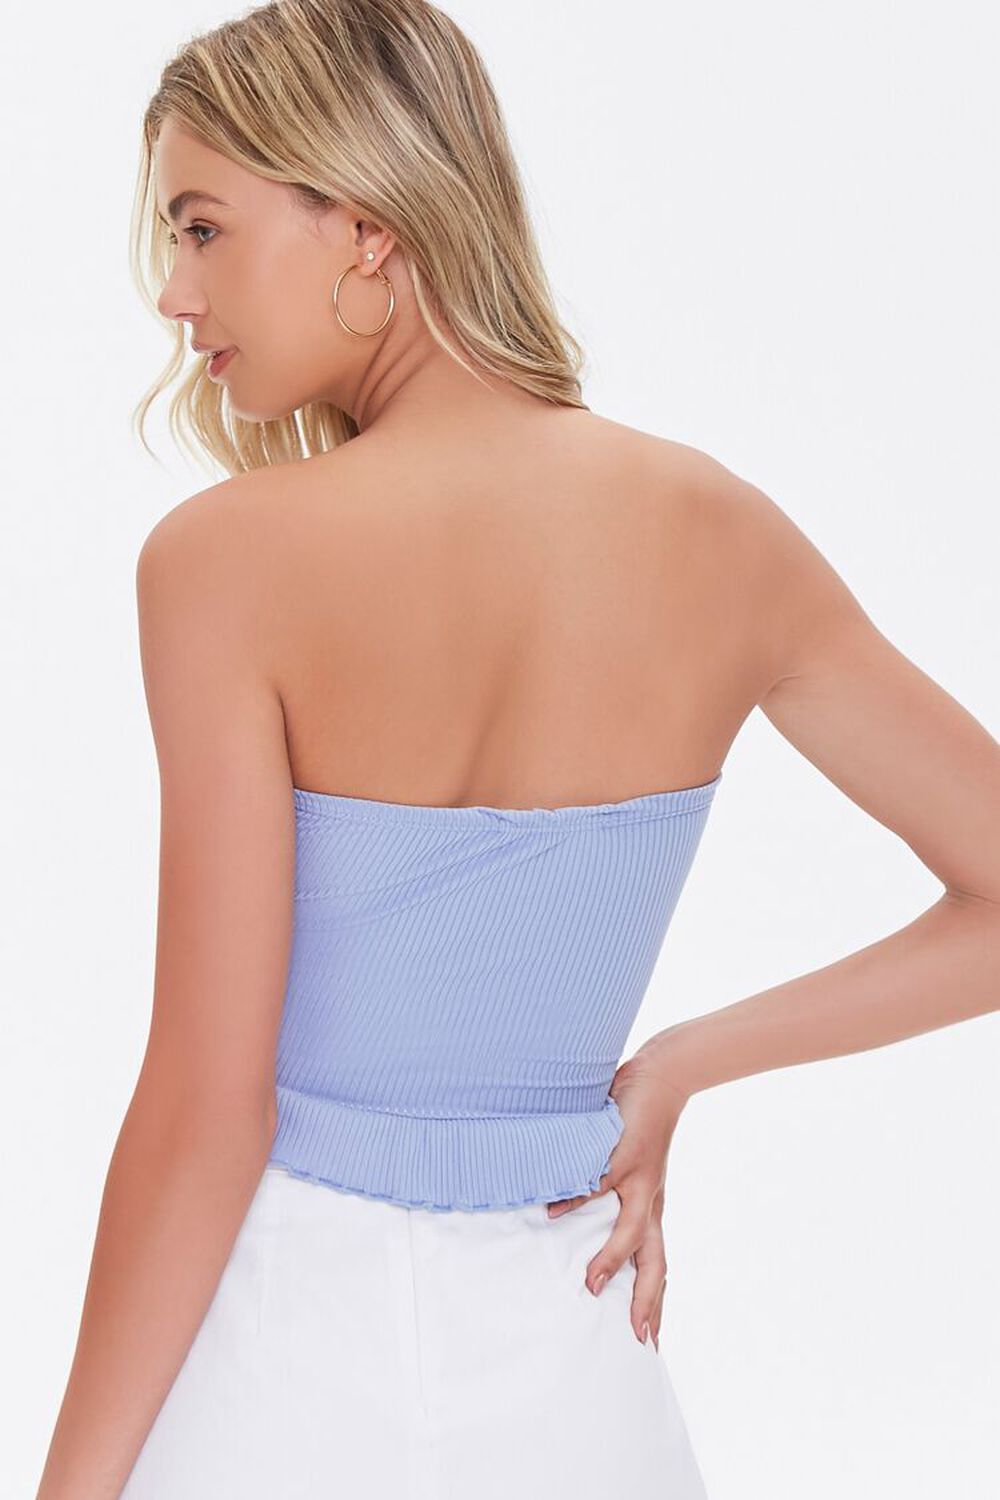 PERIWINKLE Ruched Drawstring Tube Top, image 3